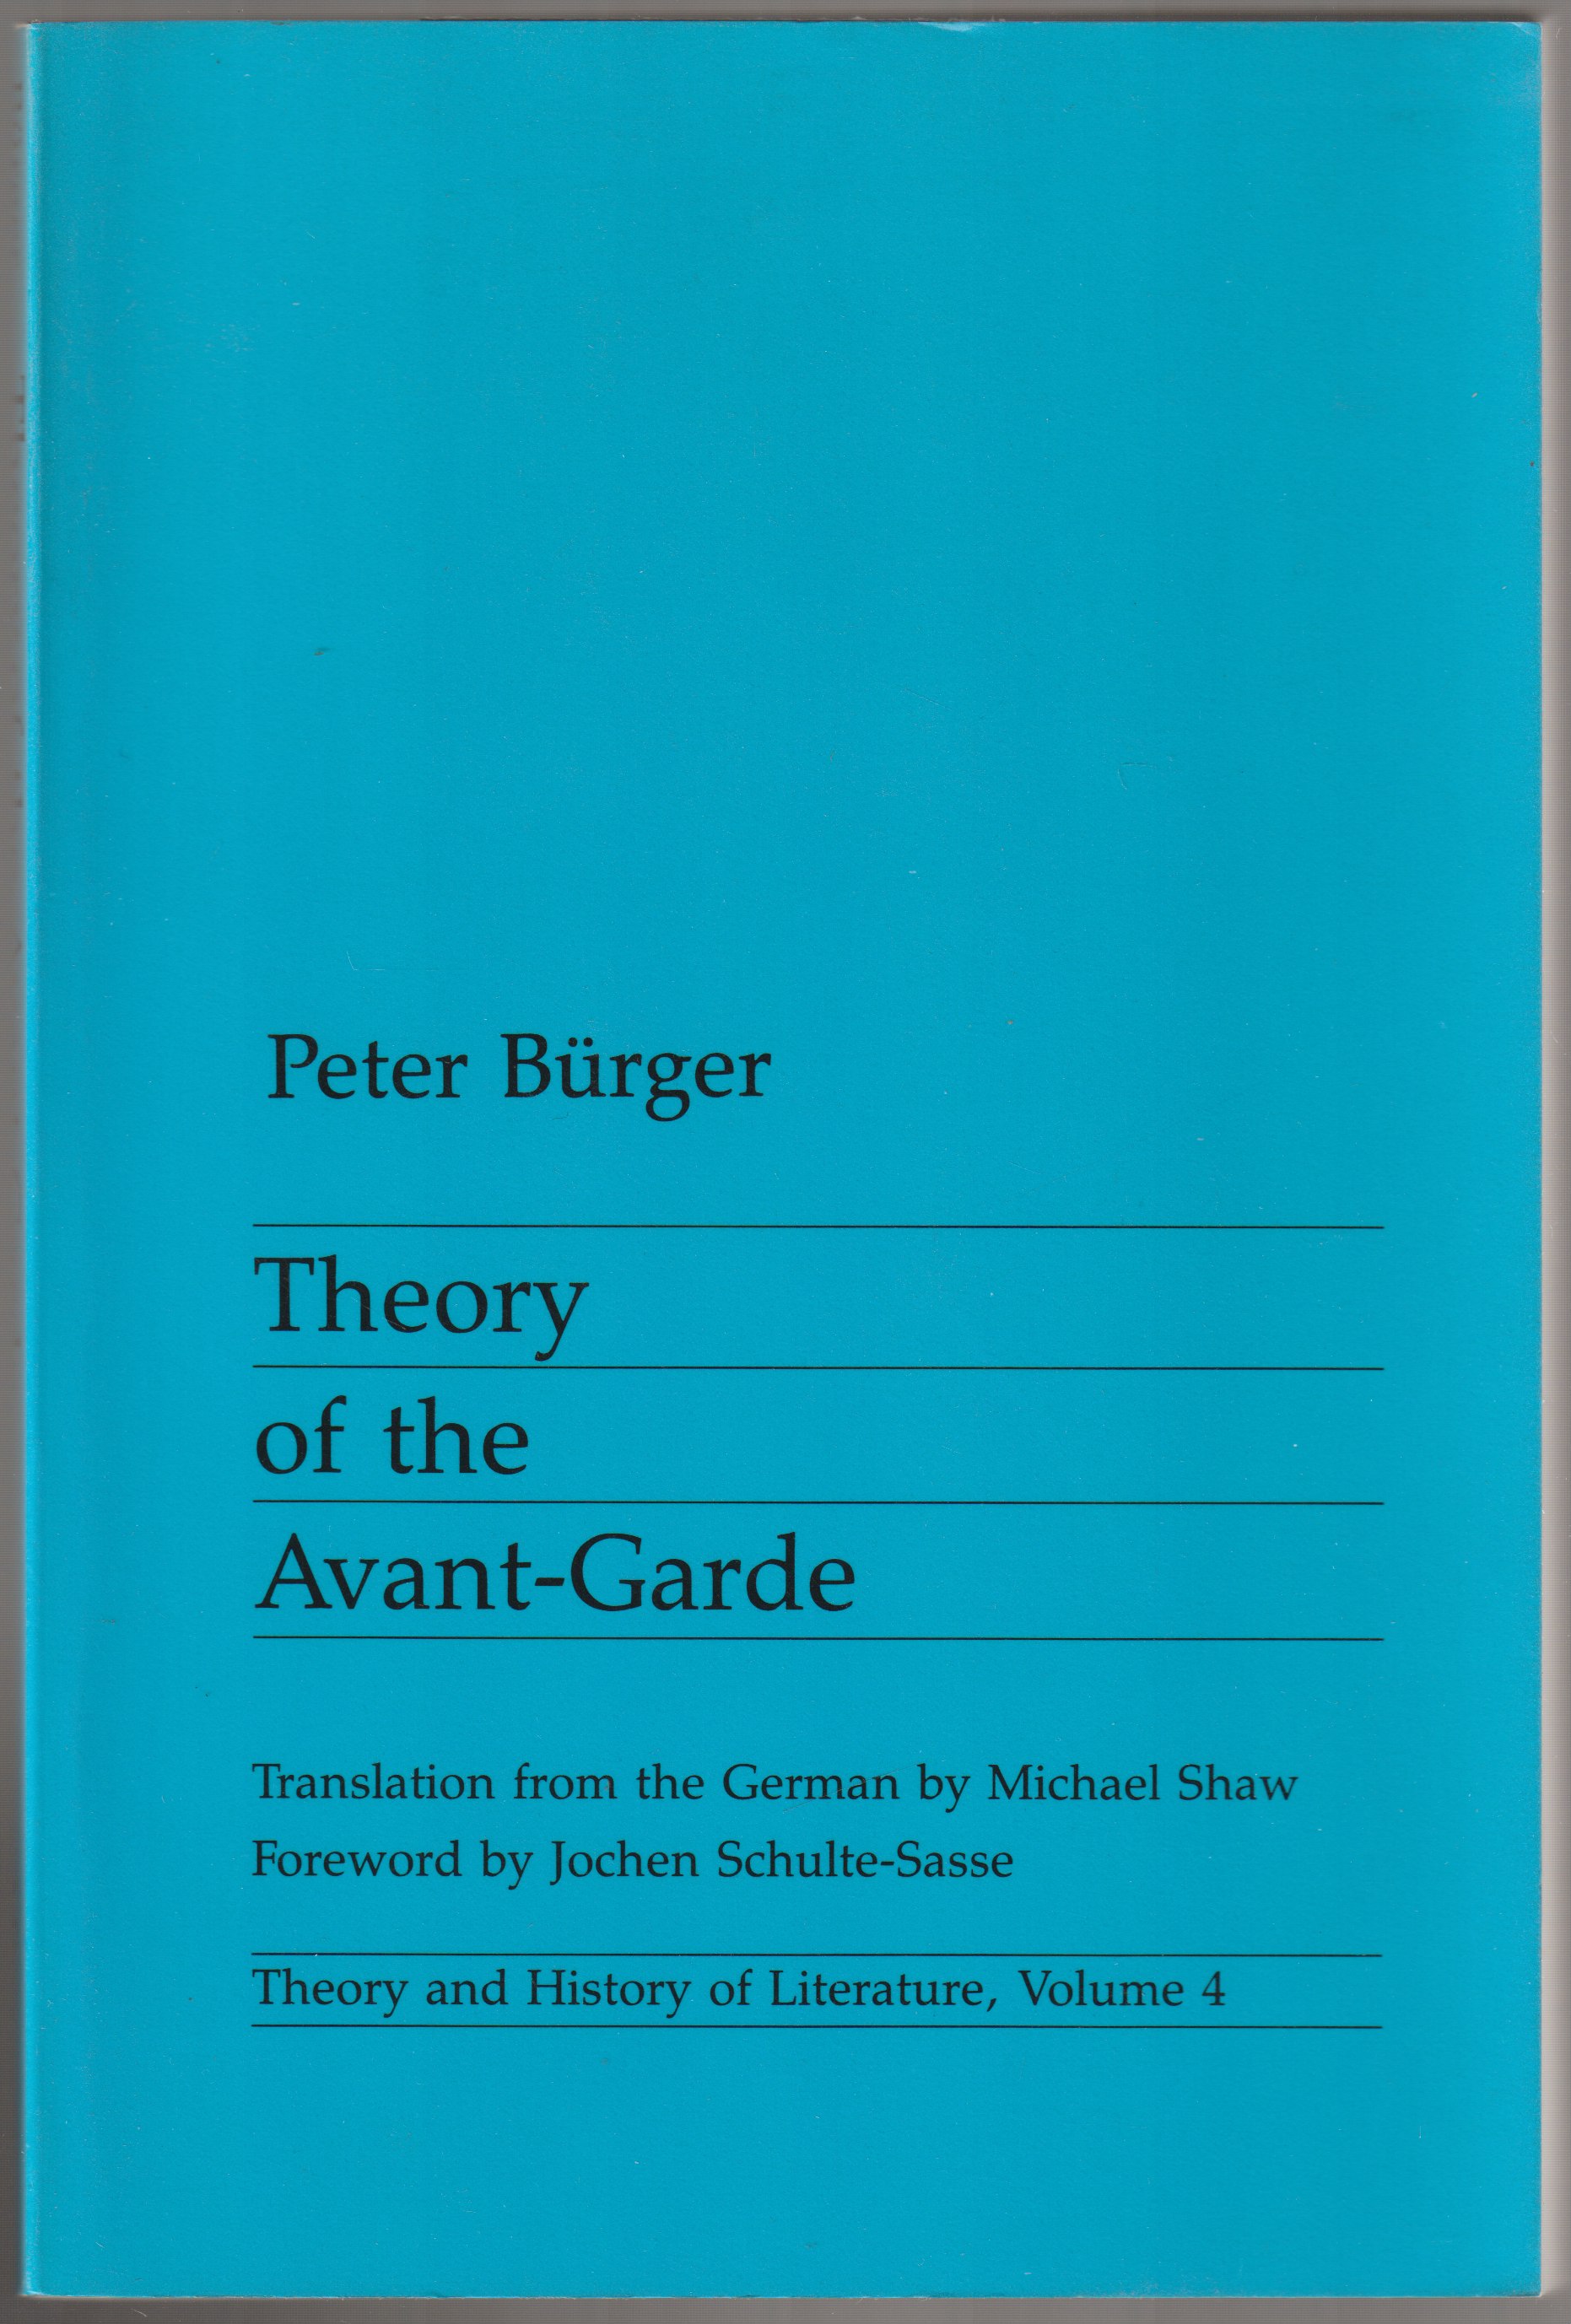 Theory of the avant-garde